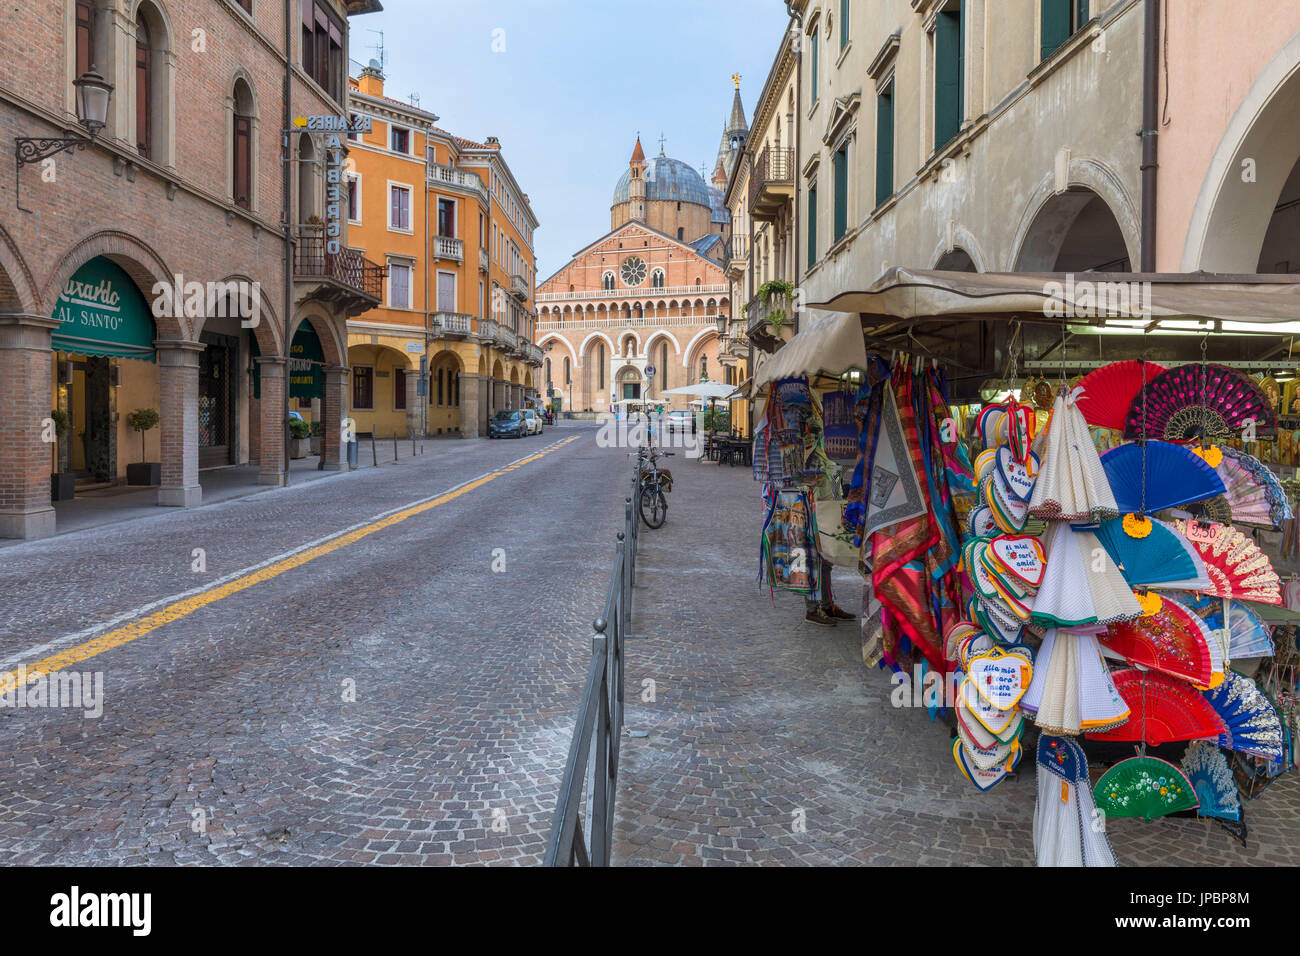 Central street in Padua, Italy looking to the Basilica of St Anthony with brightly colored garments for sale on the side walk in the foreground, veneto, italy, europe Stock Photo